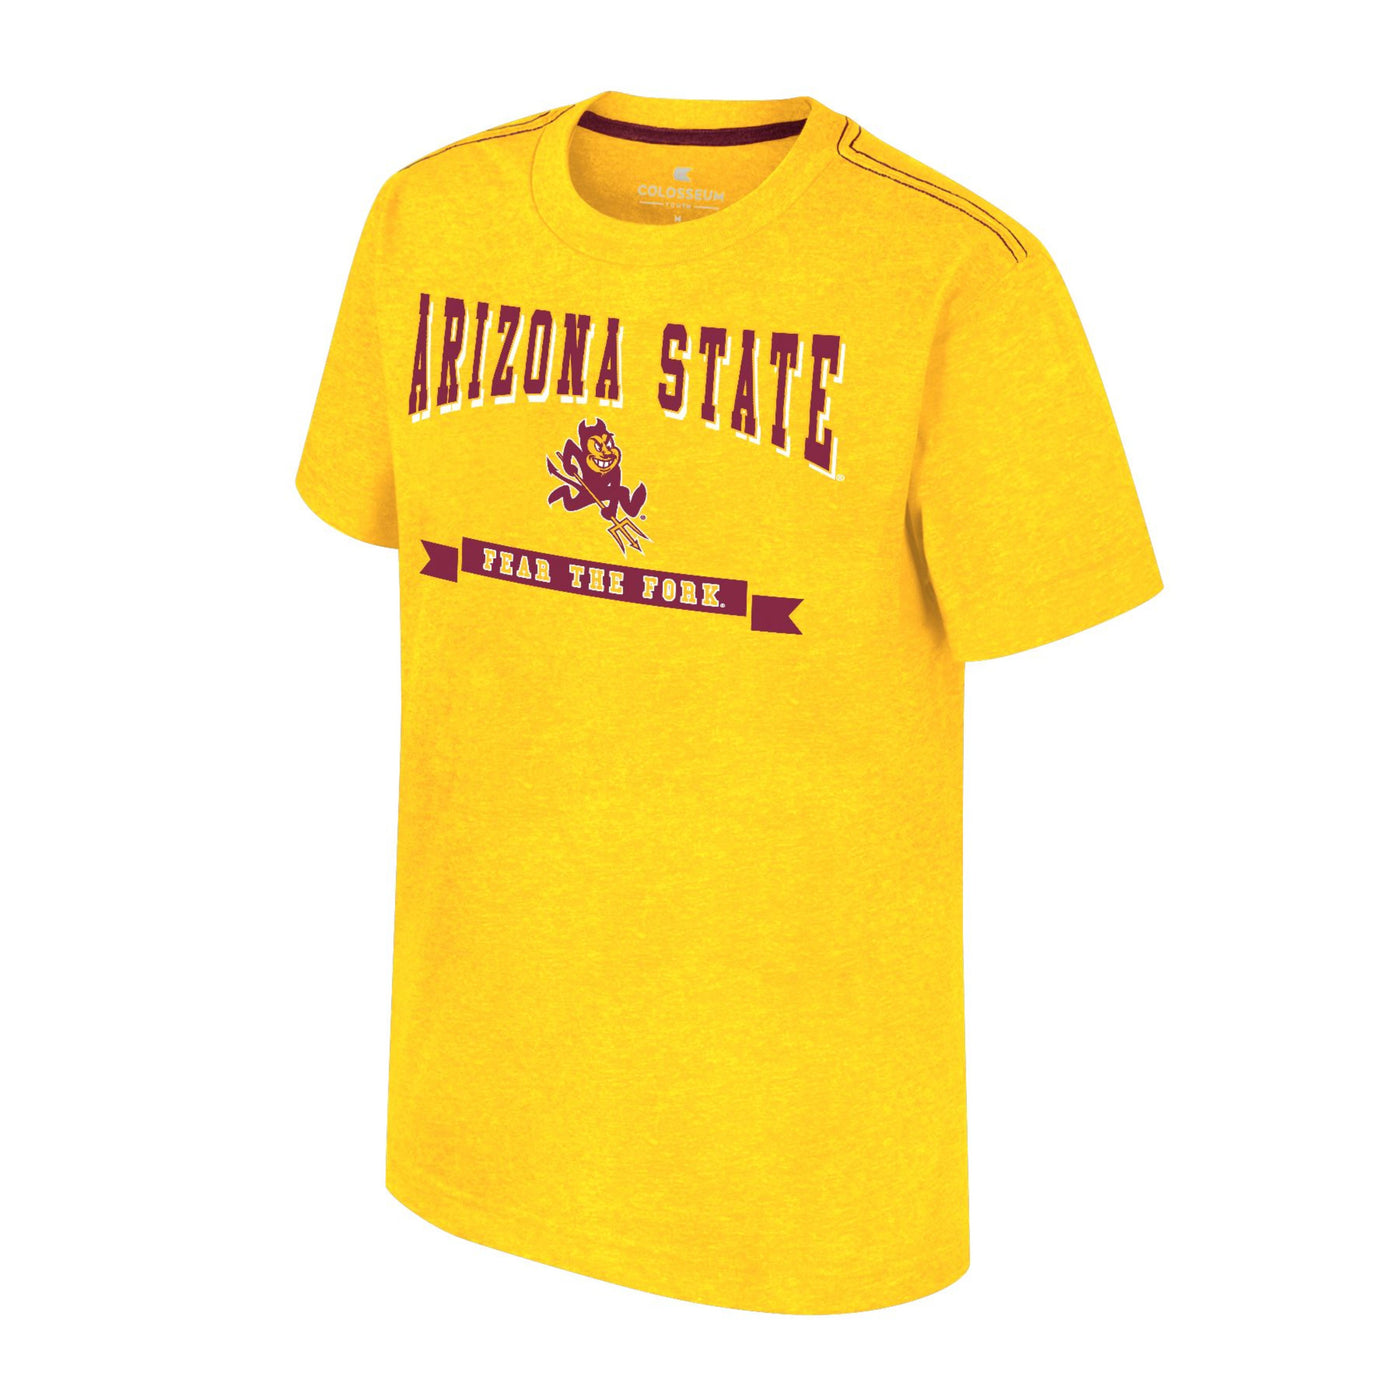 ASU gold youth tee with maroon text 